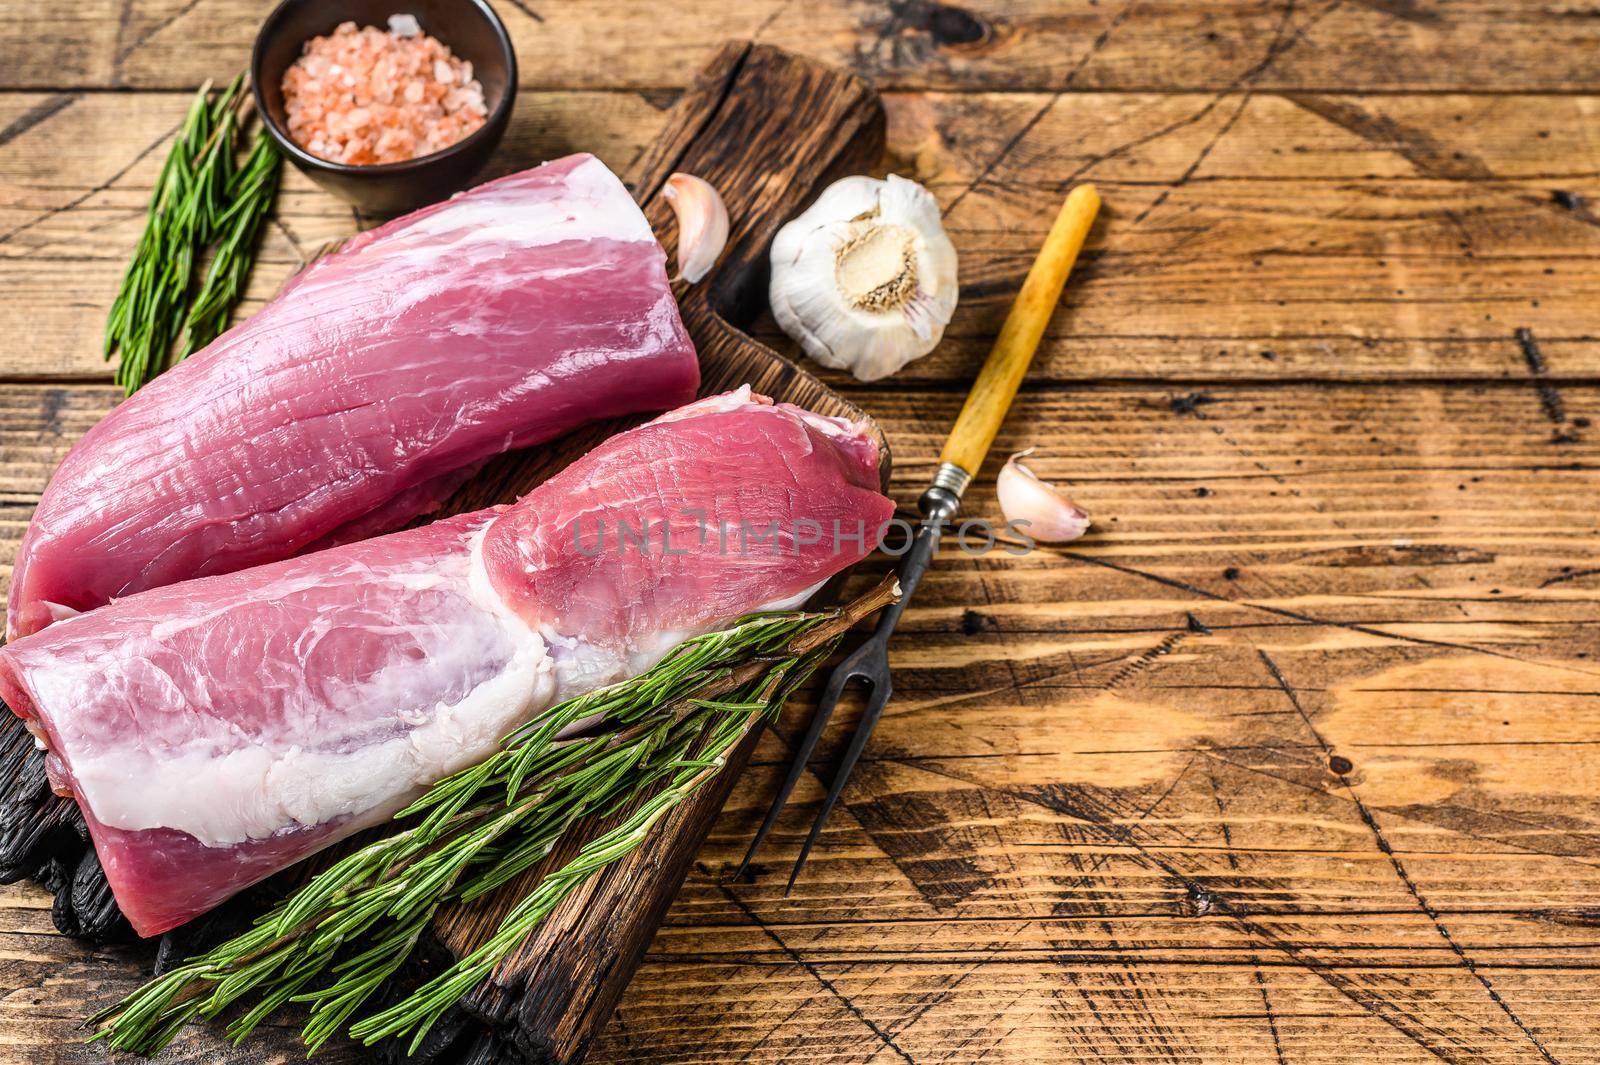 Raw cut pork tenderloin fillet meat. wooden background. Top view. Copy space by Composter